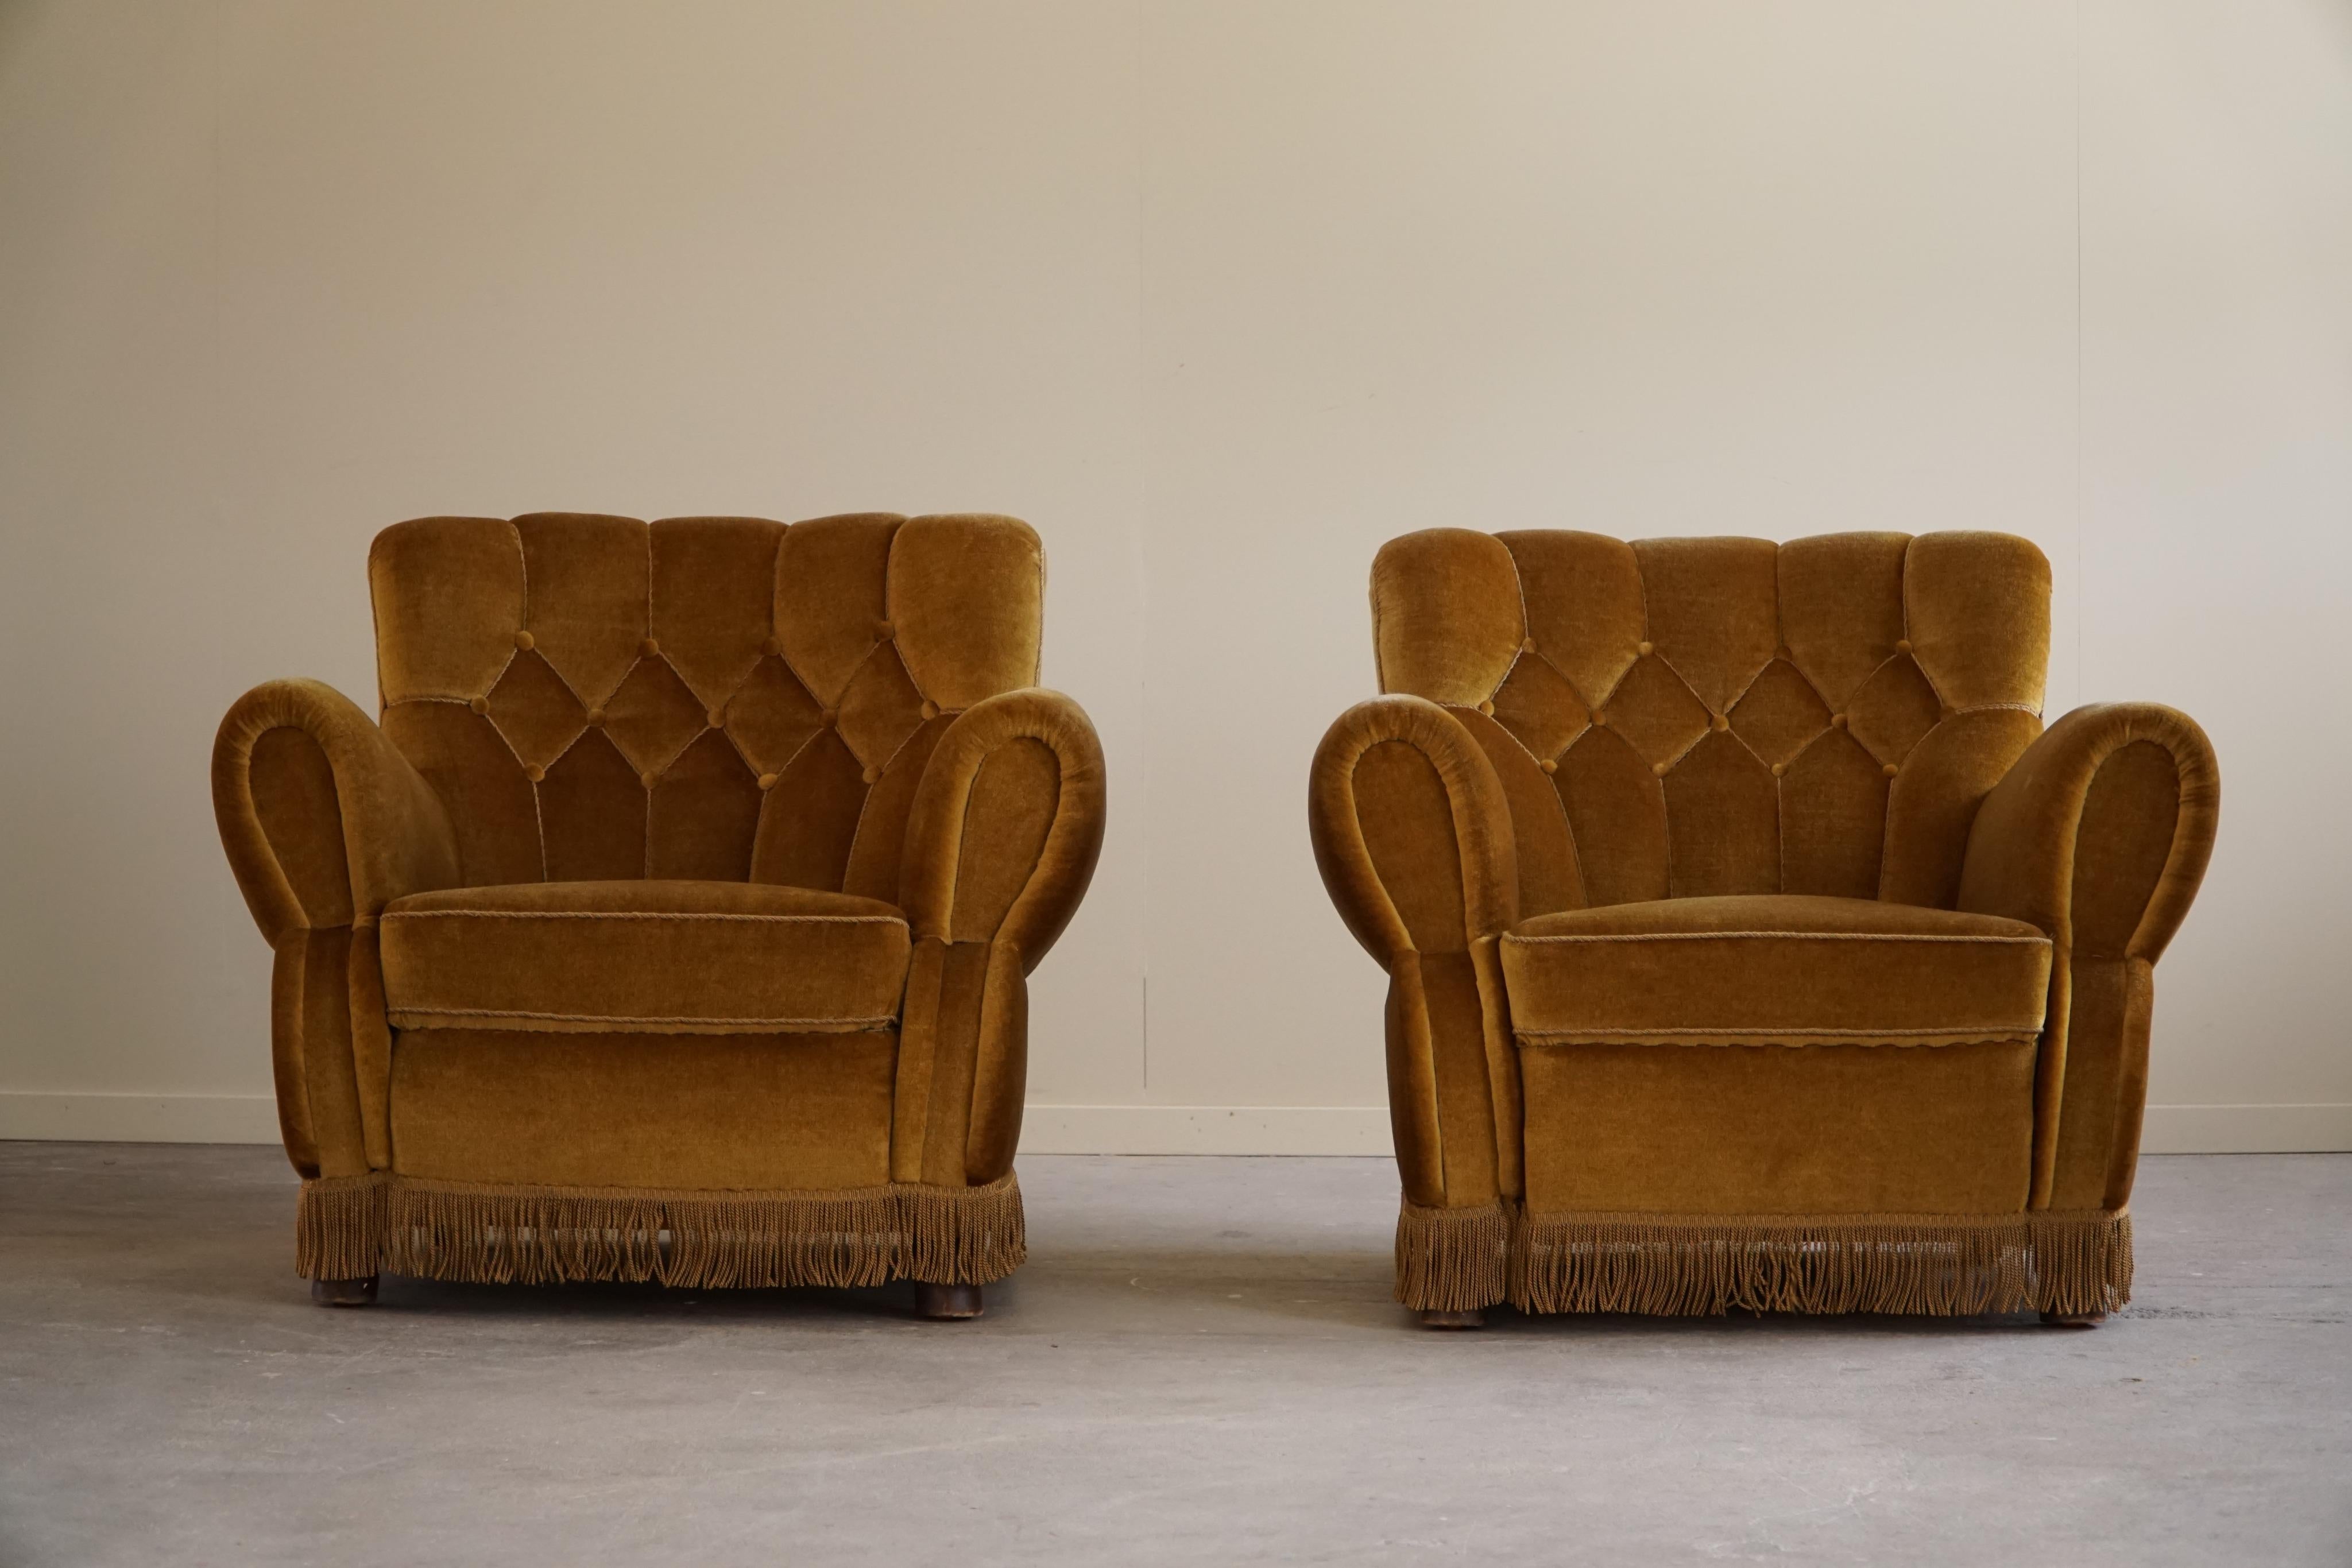 Fabric A Pair of Art Deco Lounge Chairs in Yellow Velour, Danish Carbinetmaker, 1940s For Sale